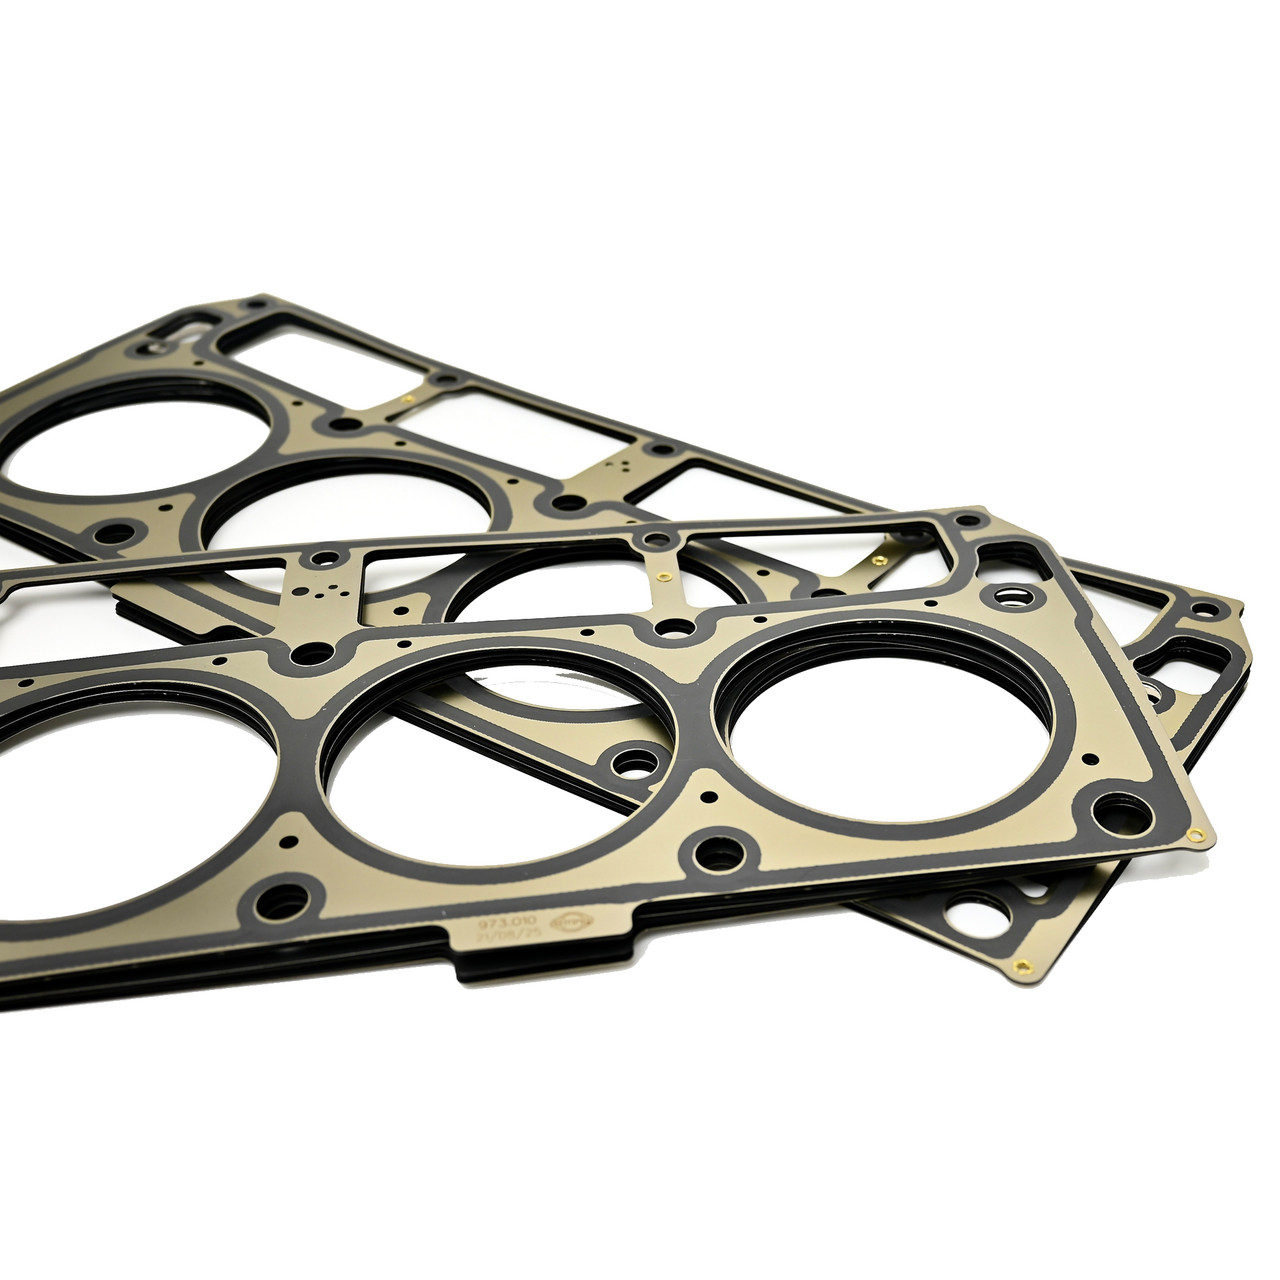 7-Layer 5.3L 4.8L Small Bore MLS Head Gasket Pair for Boosted Nitrous Turbo  Supercharged 4.8 5.3 LS Michigan Motorsports